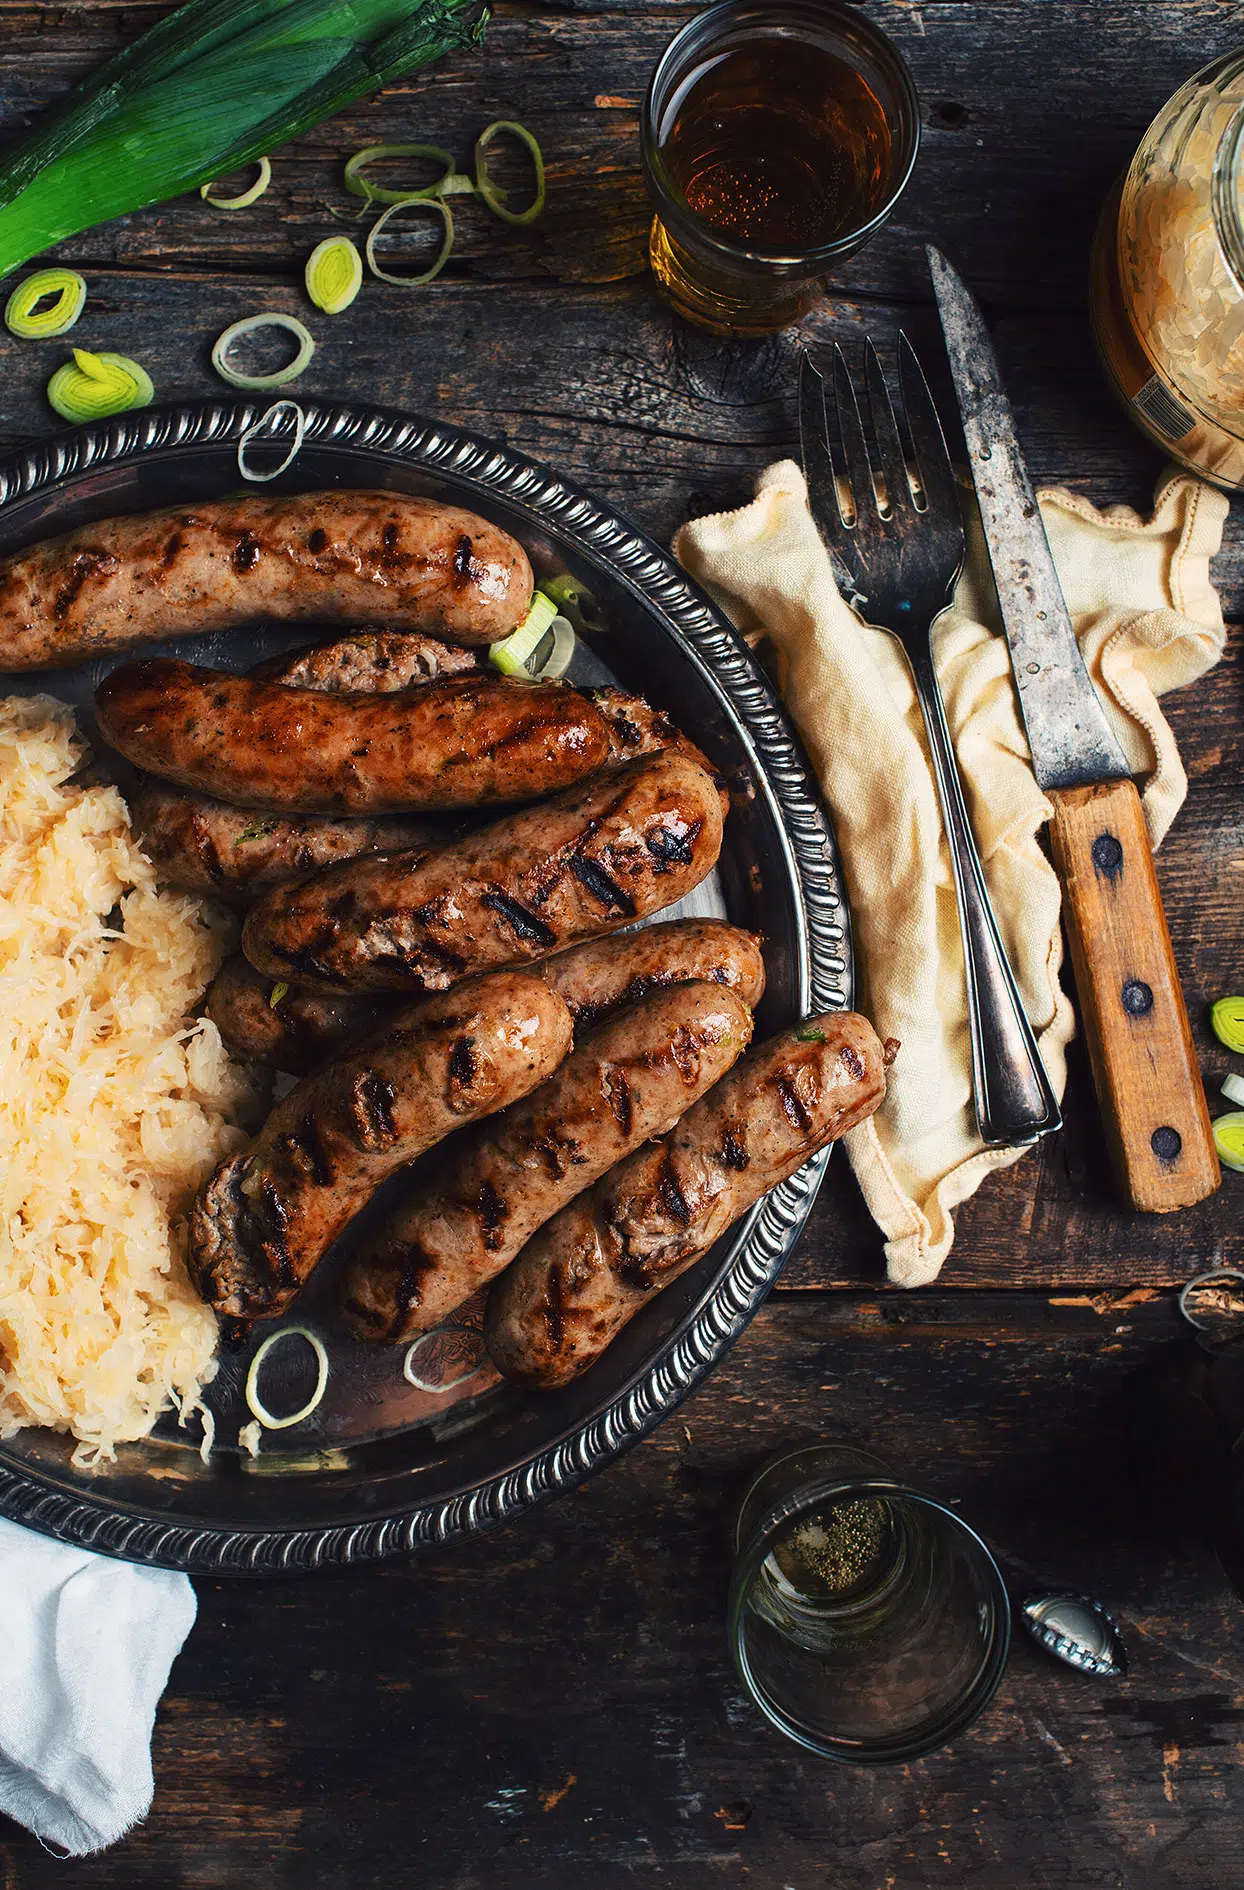 Bratwurst sausages with leeks and beer